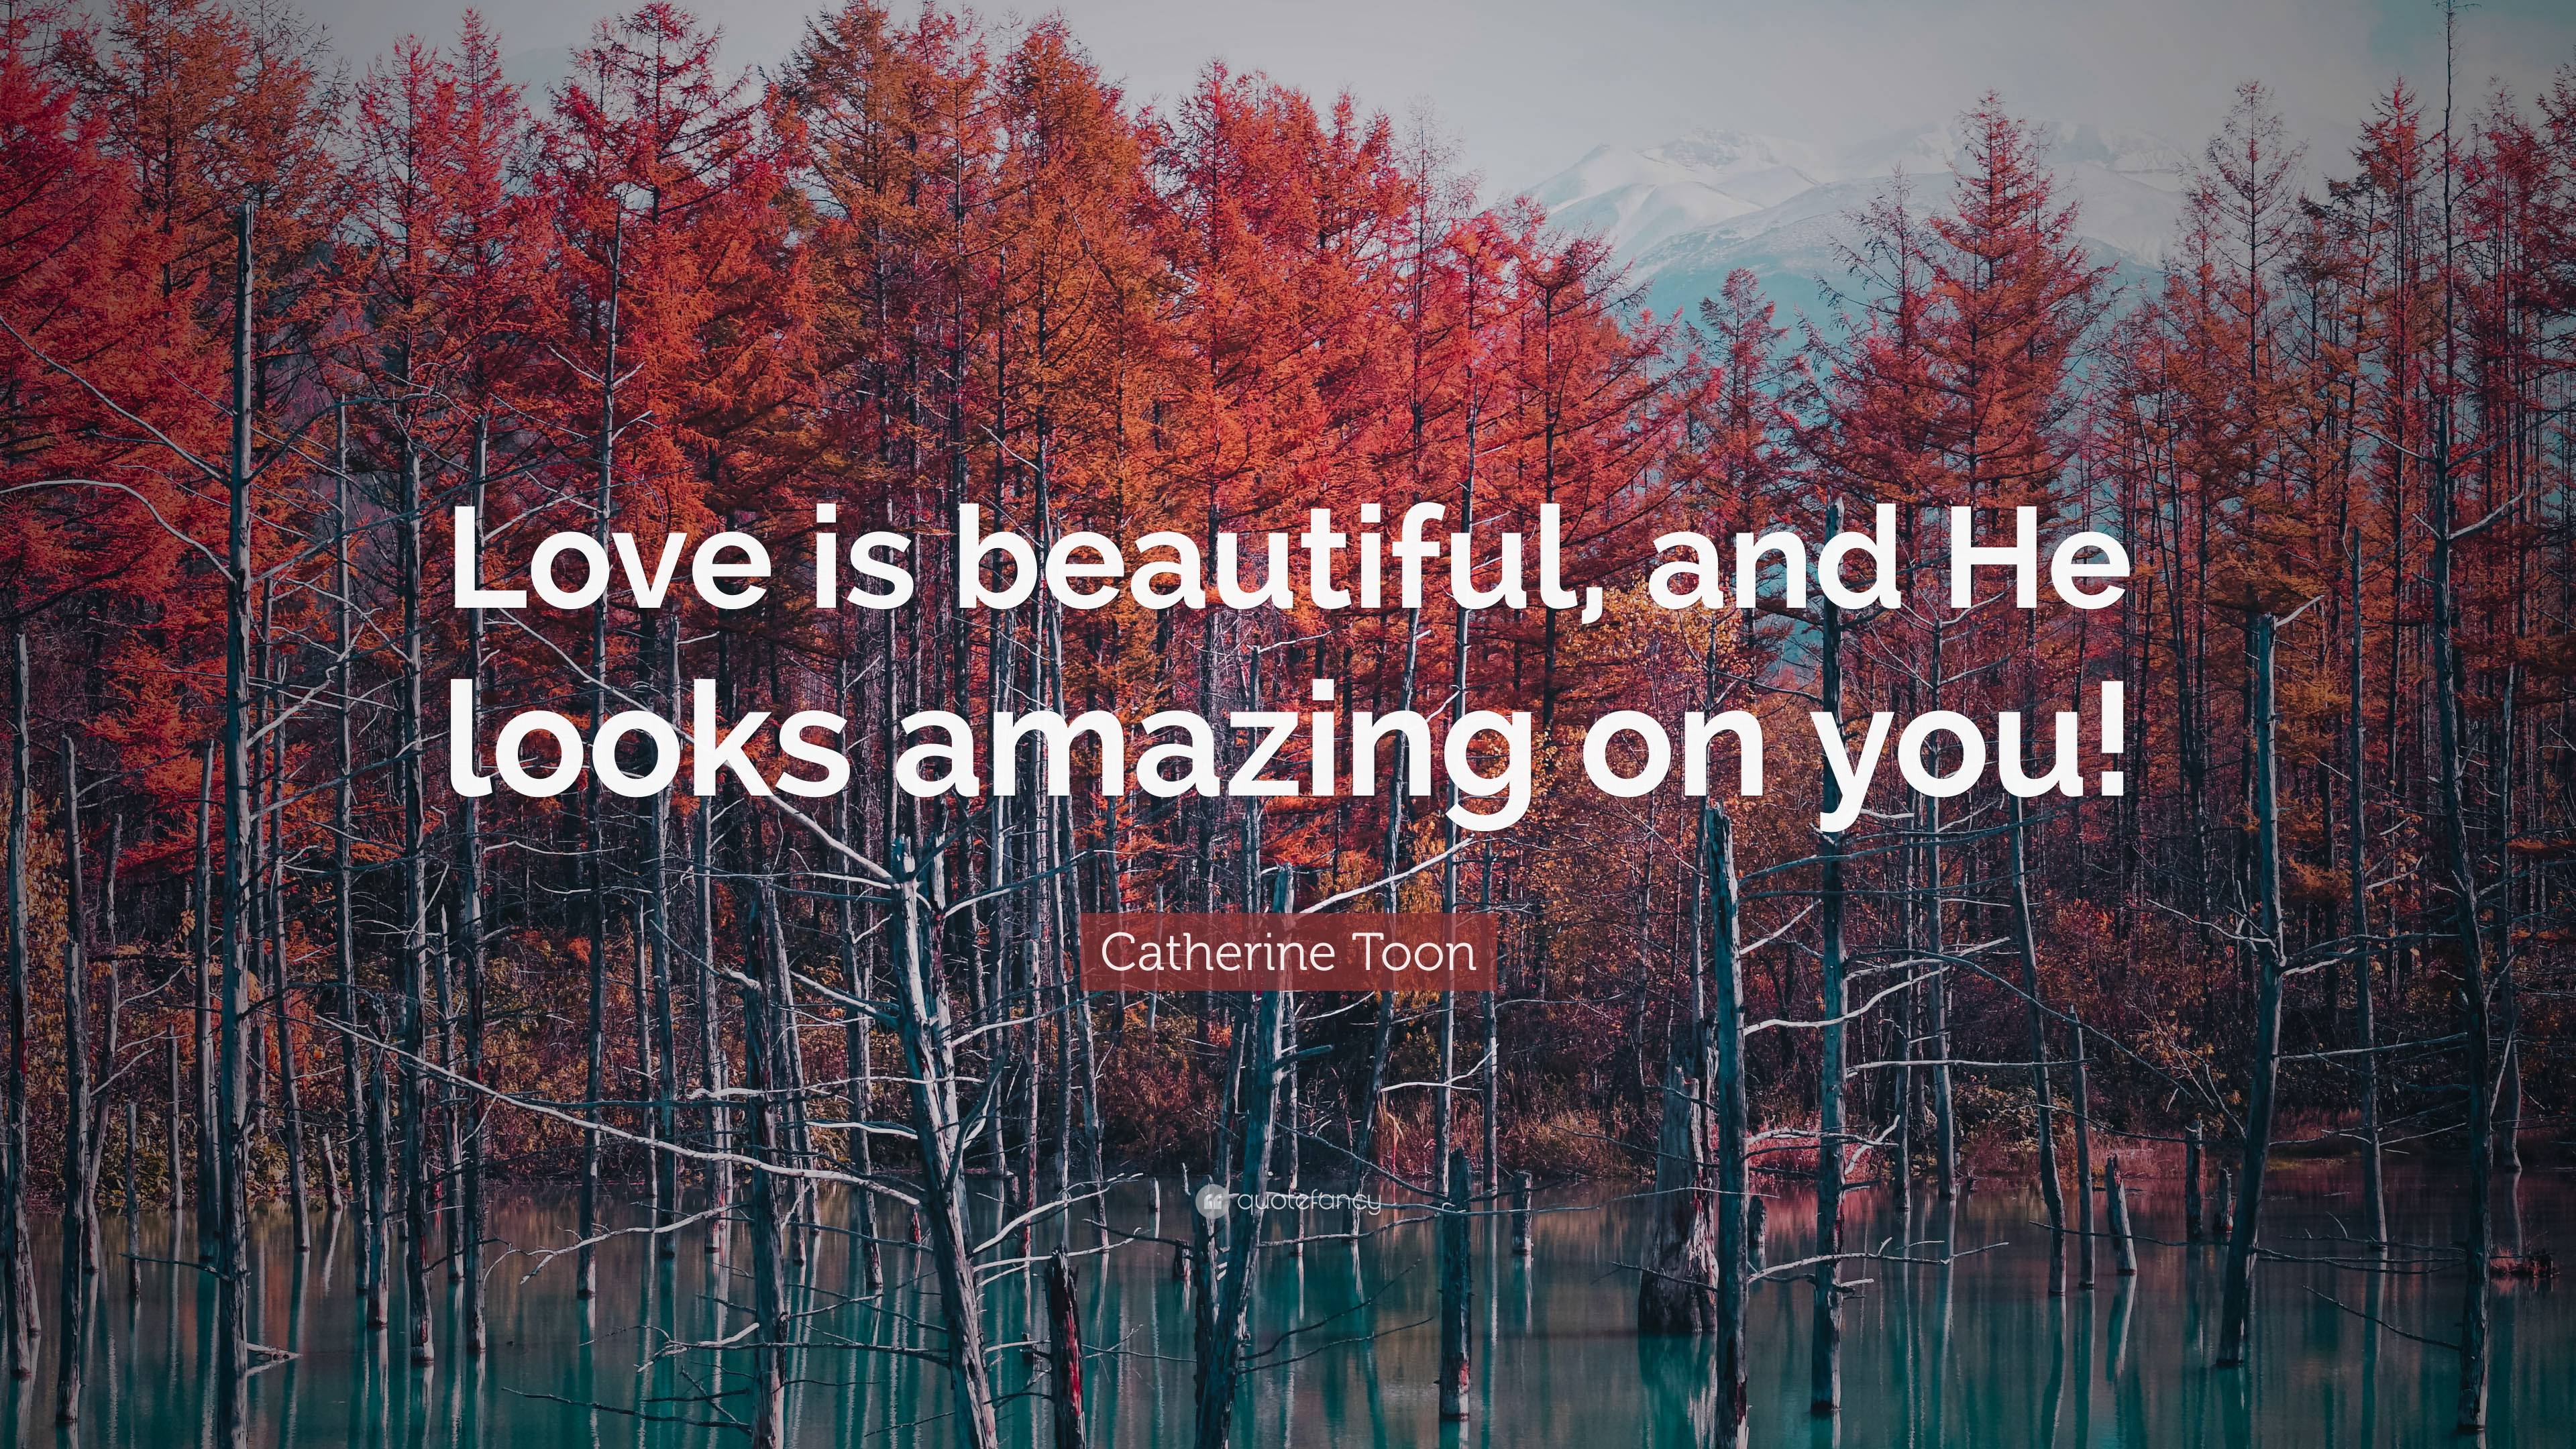 Catherine Toon Quote: “Love is beautiful, and He looks amazing on you!”